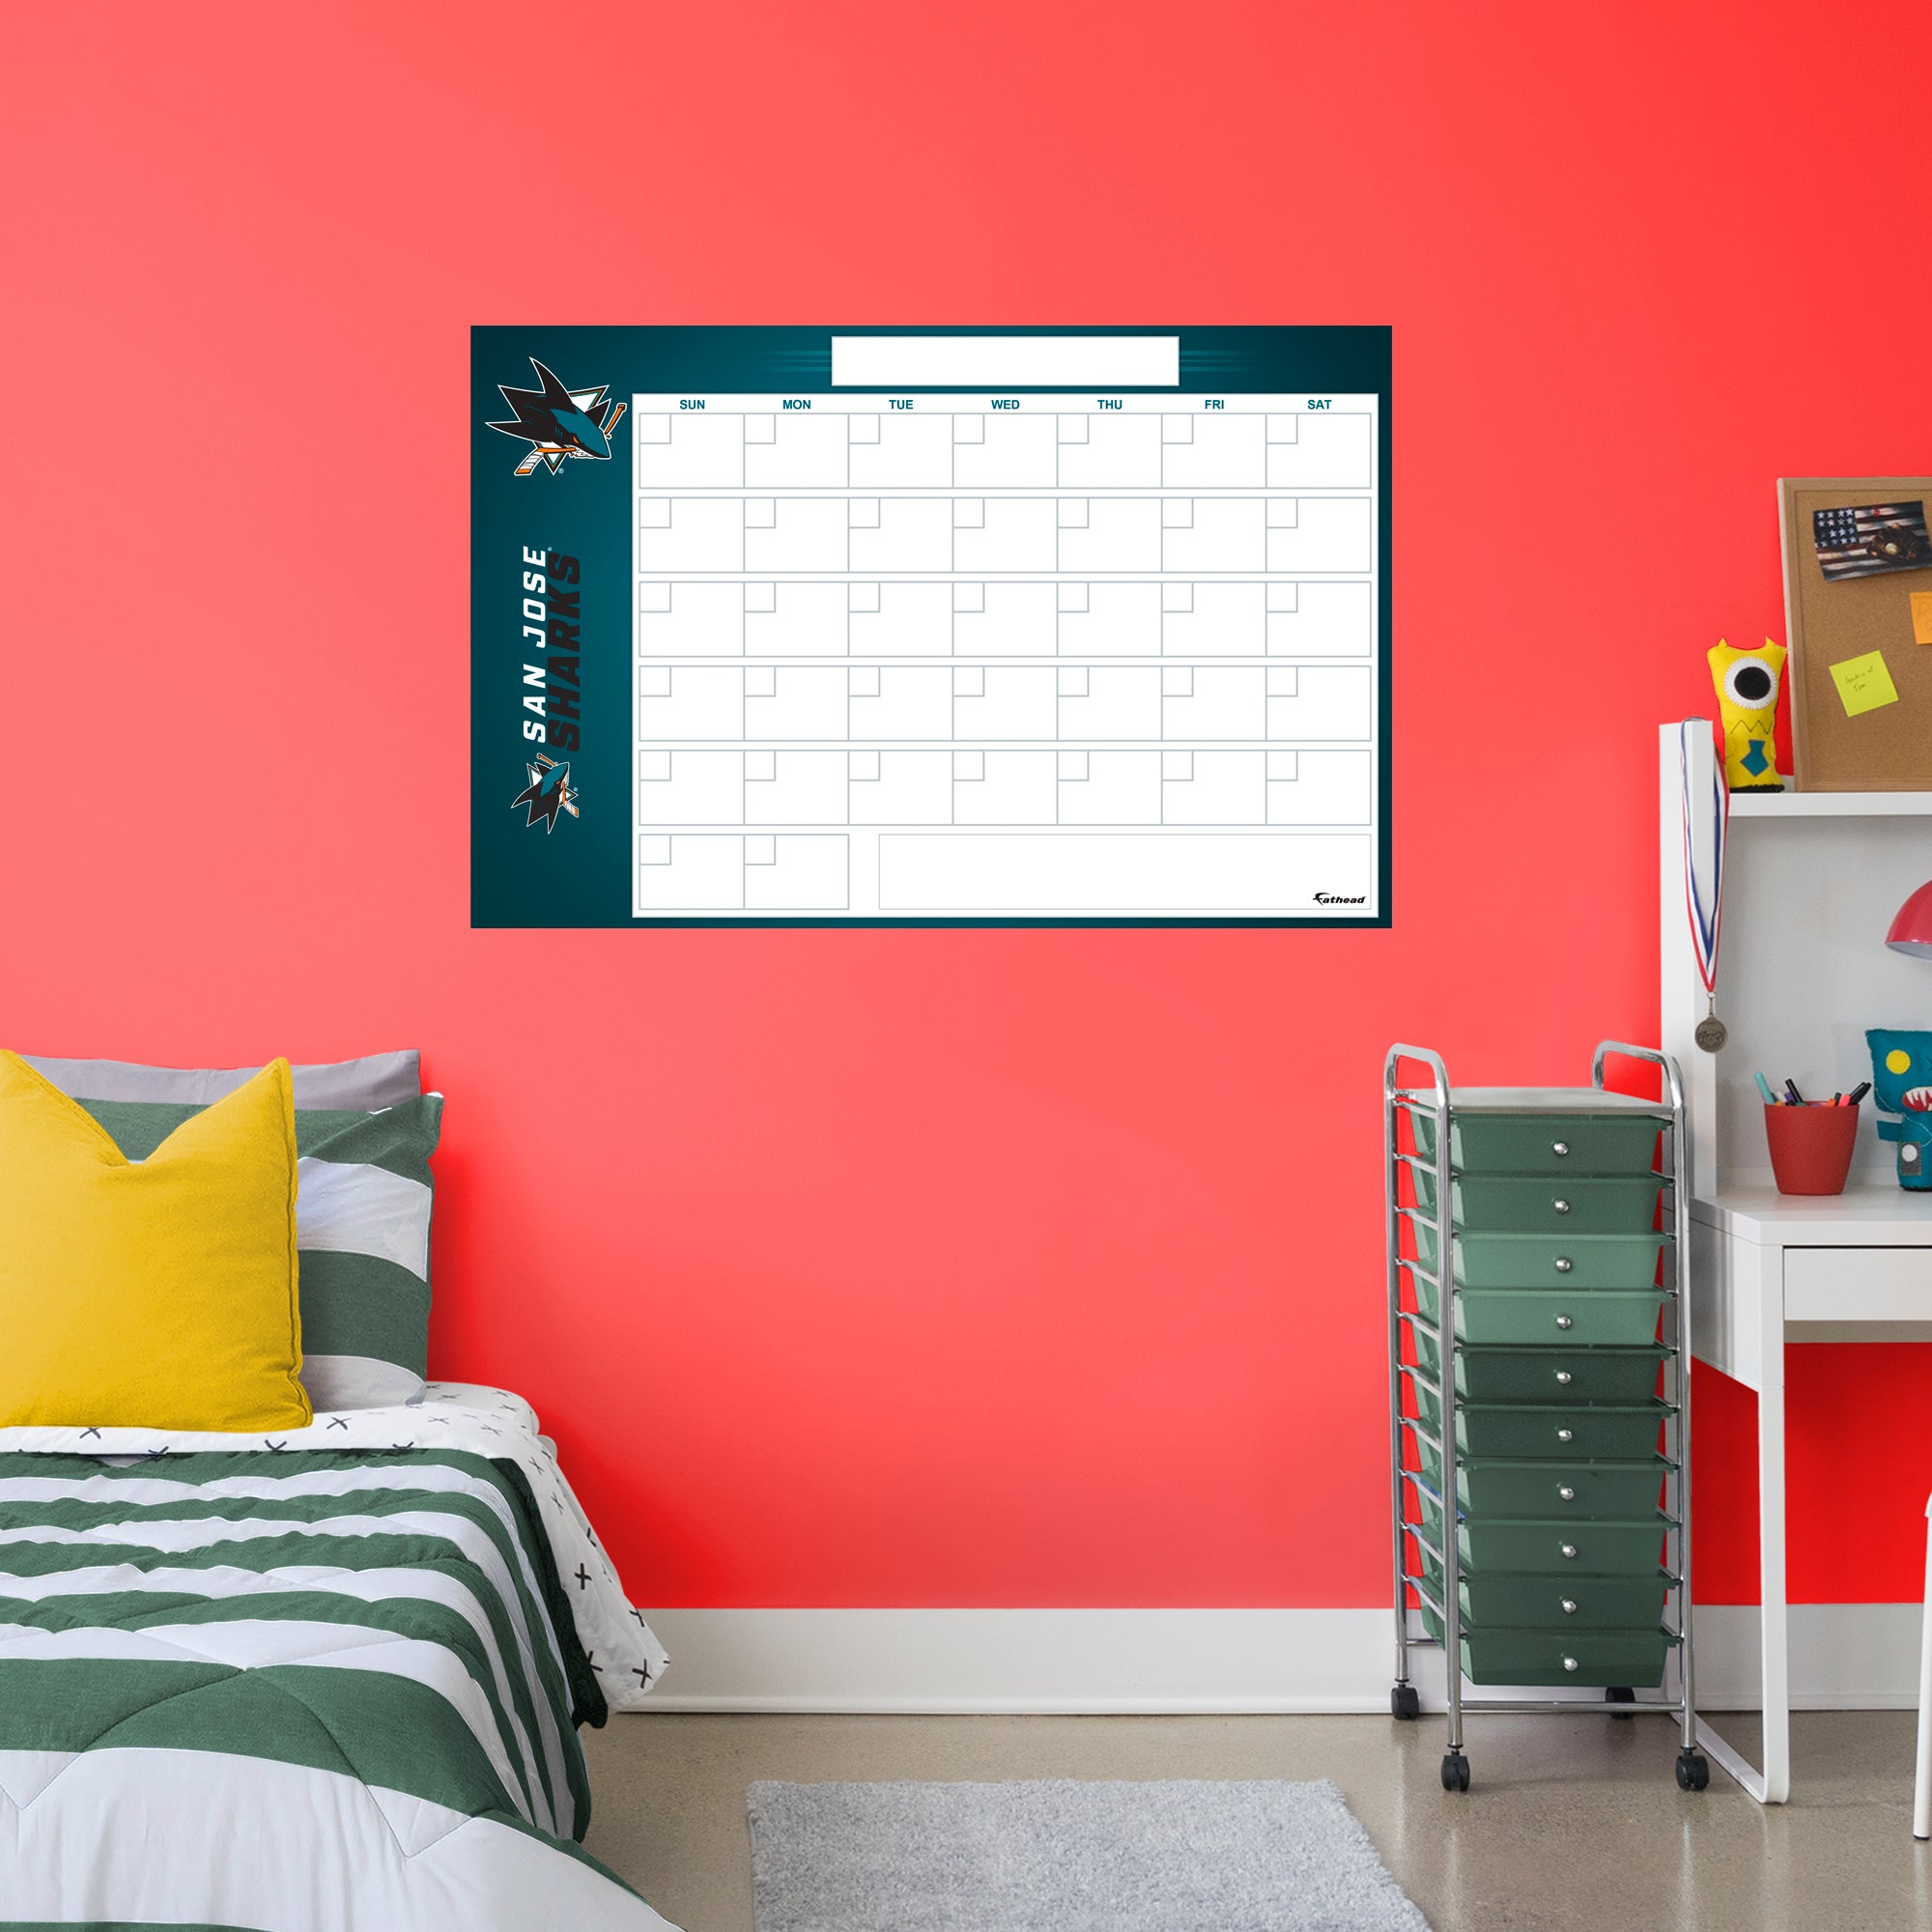 San Jose Sharks Dry Erase Calendar - Officially Licensed NHL Removable Wall Decal Giant Decal (57"W x 34"H) by Fathead | Vinyl